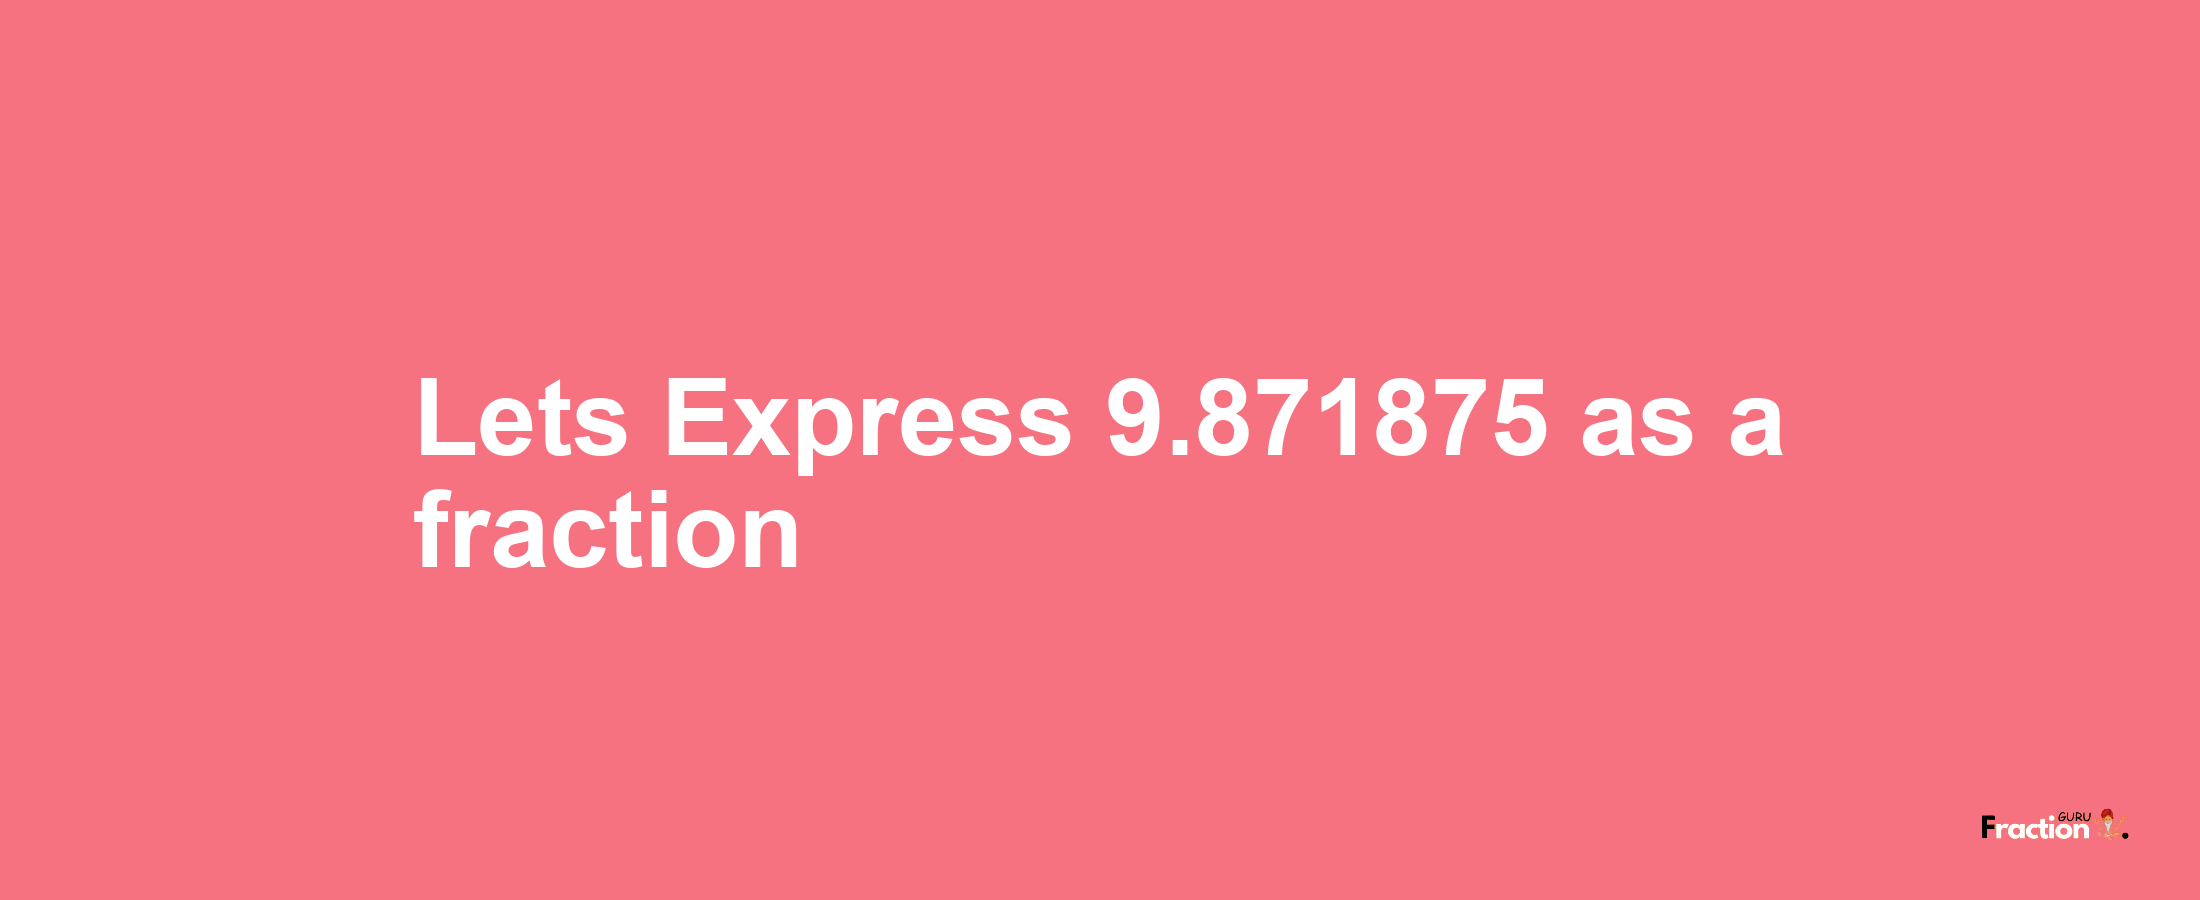 Lets Express 9.871875 as afraction